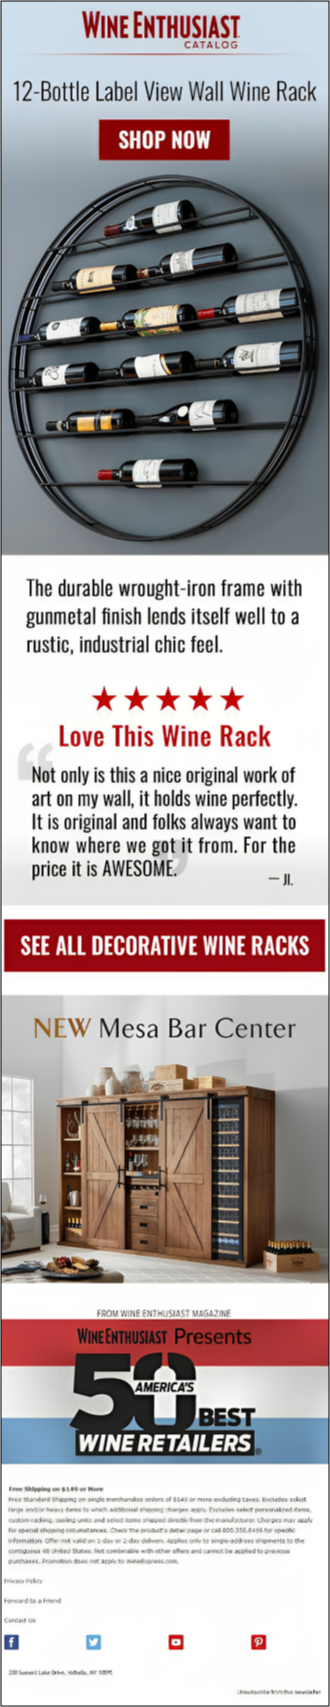 Wine Enthusiast email example